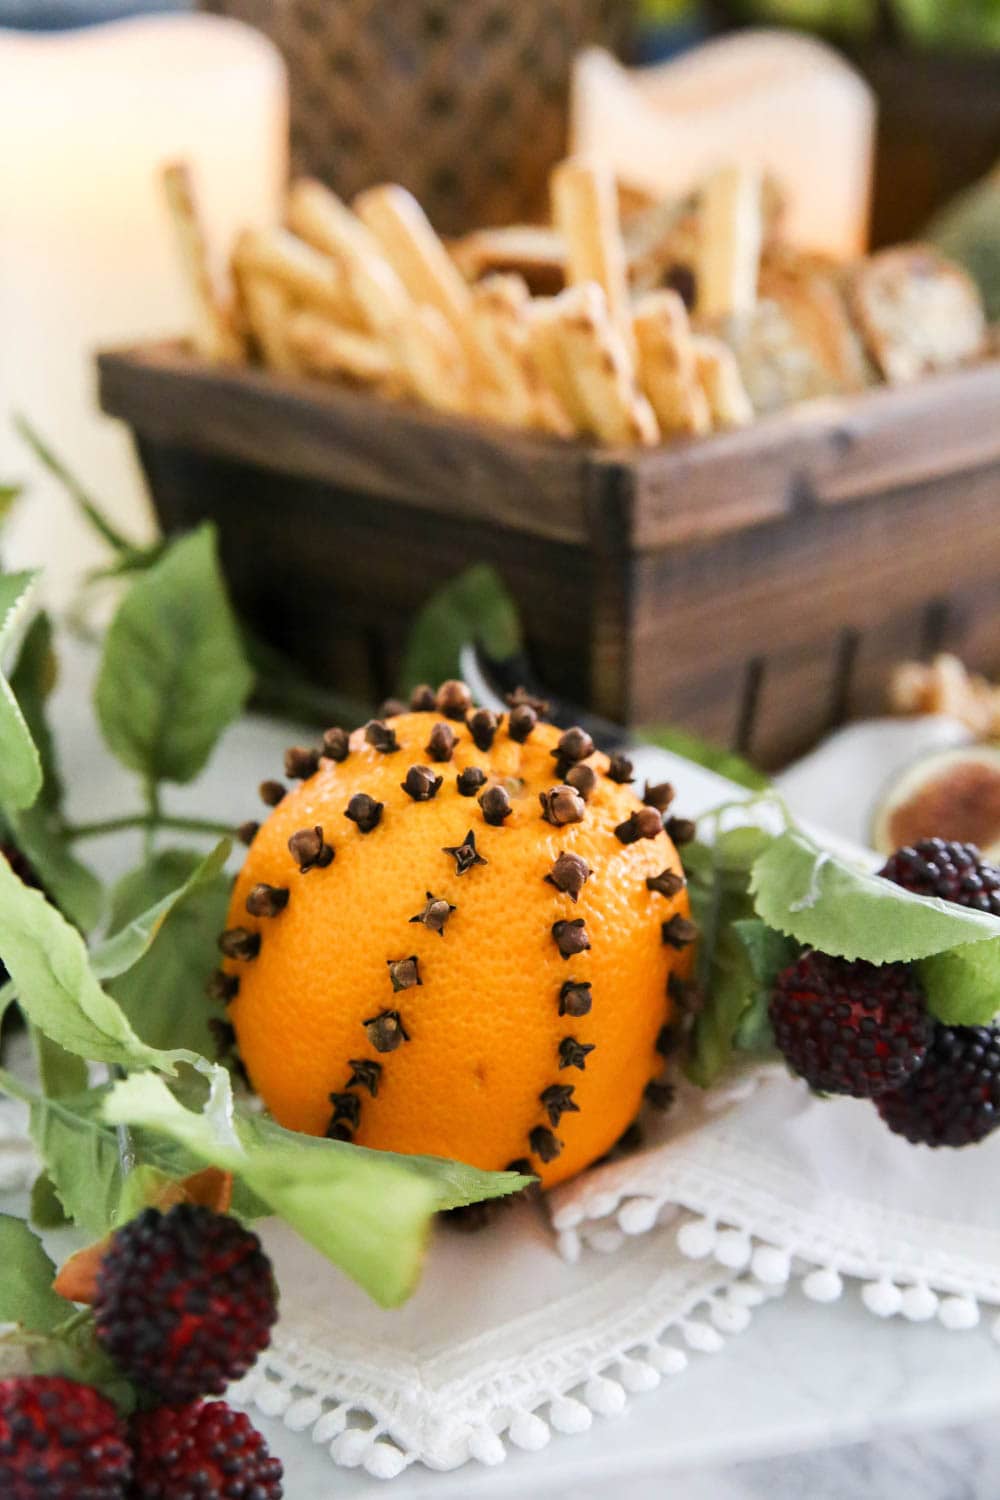 Such an easy and delicious smelling orange clove pomander to add to your fall tables and to decorate with. #ABlissfulNest #fall #appetizer